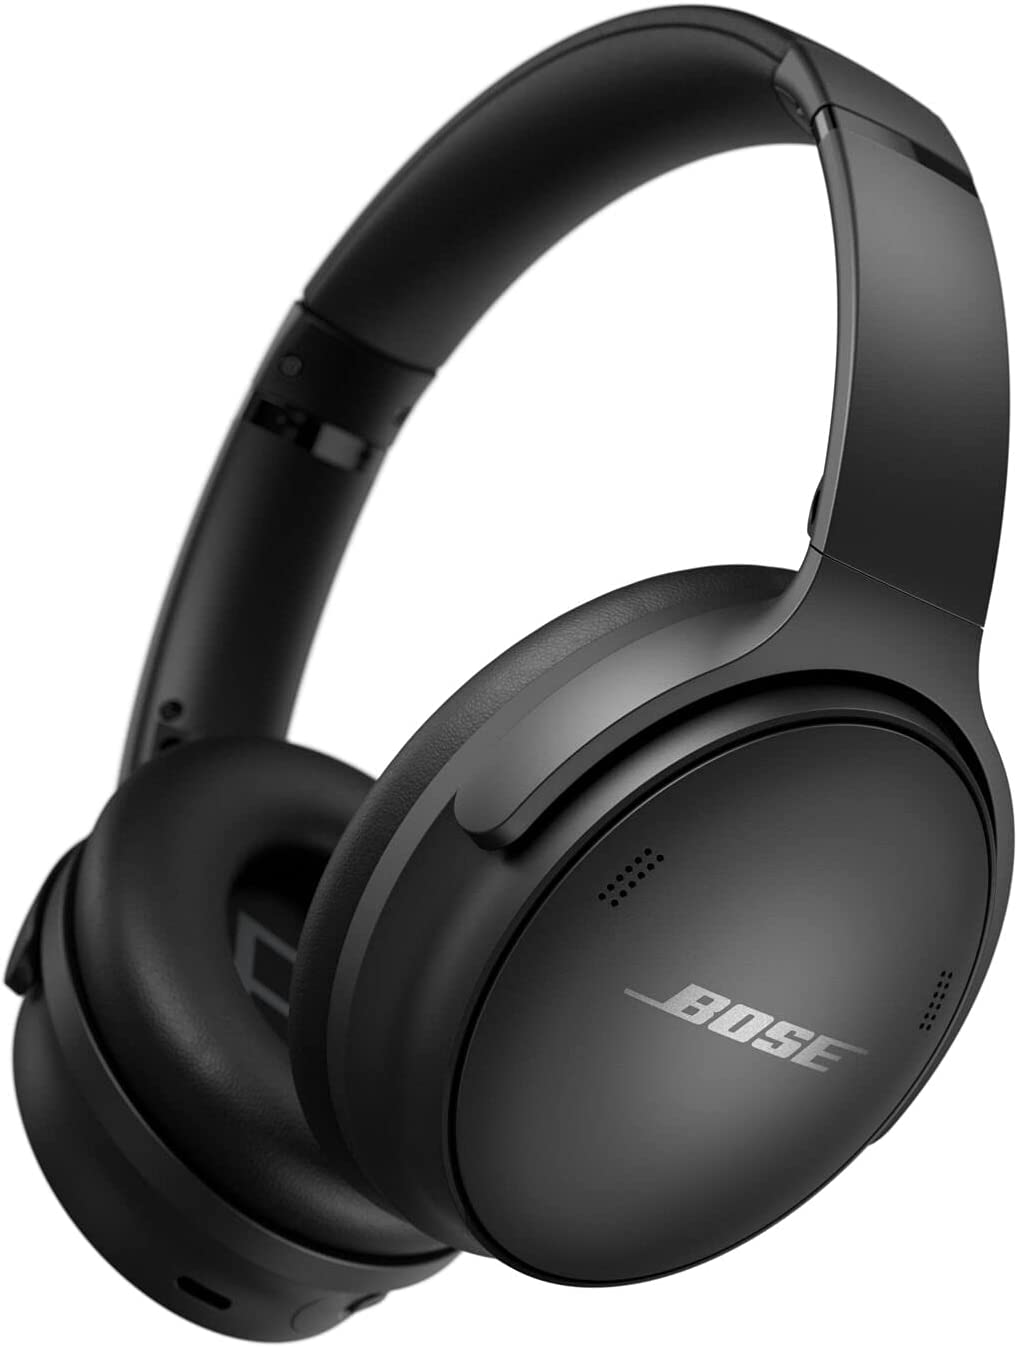 With a longer battery life and Aware Mode, the Bose QuietComfort 45 replaces the QuietComfort 35 II